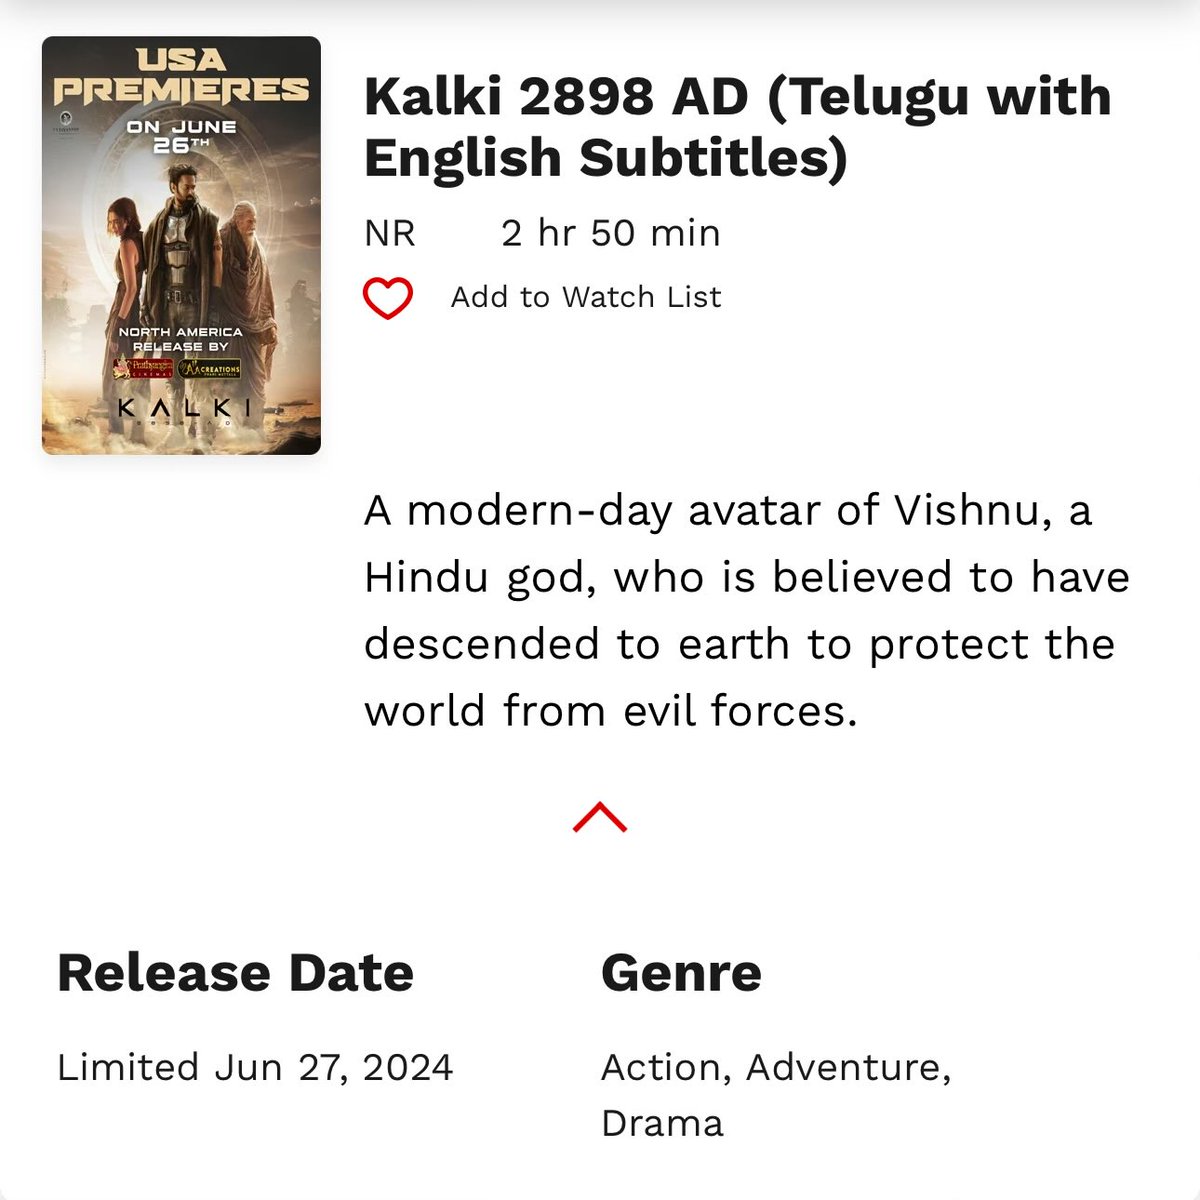 #Kalki2898AD Final Run Time USA🇺🇸
🚨🚨🚨 2hr 50 min 🚨🚨🚨

Get ready for massive pre booking updates from next week..!!!

#Prabhas #Kalki2898ADonJune27
#ComicZone #ComicMagic
Like share comment & 
Follow @ComicMagic_784